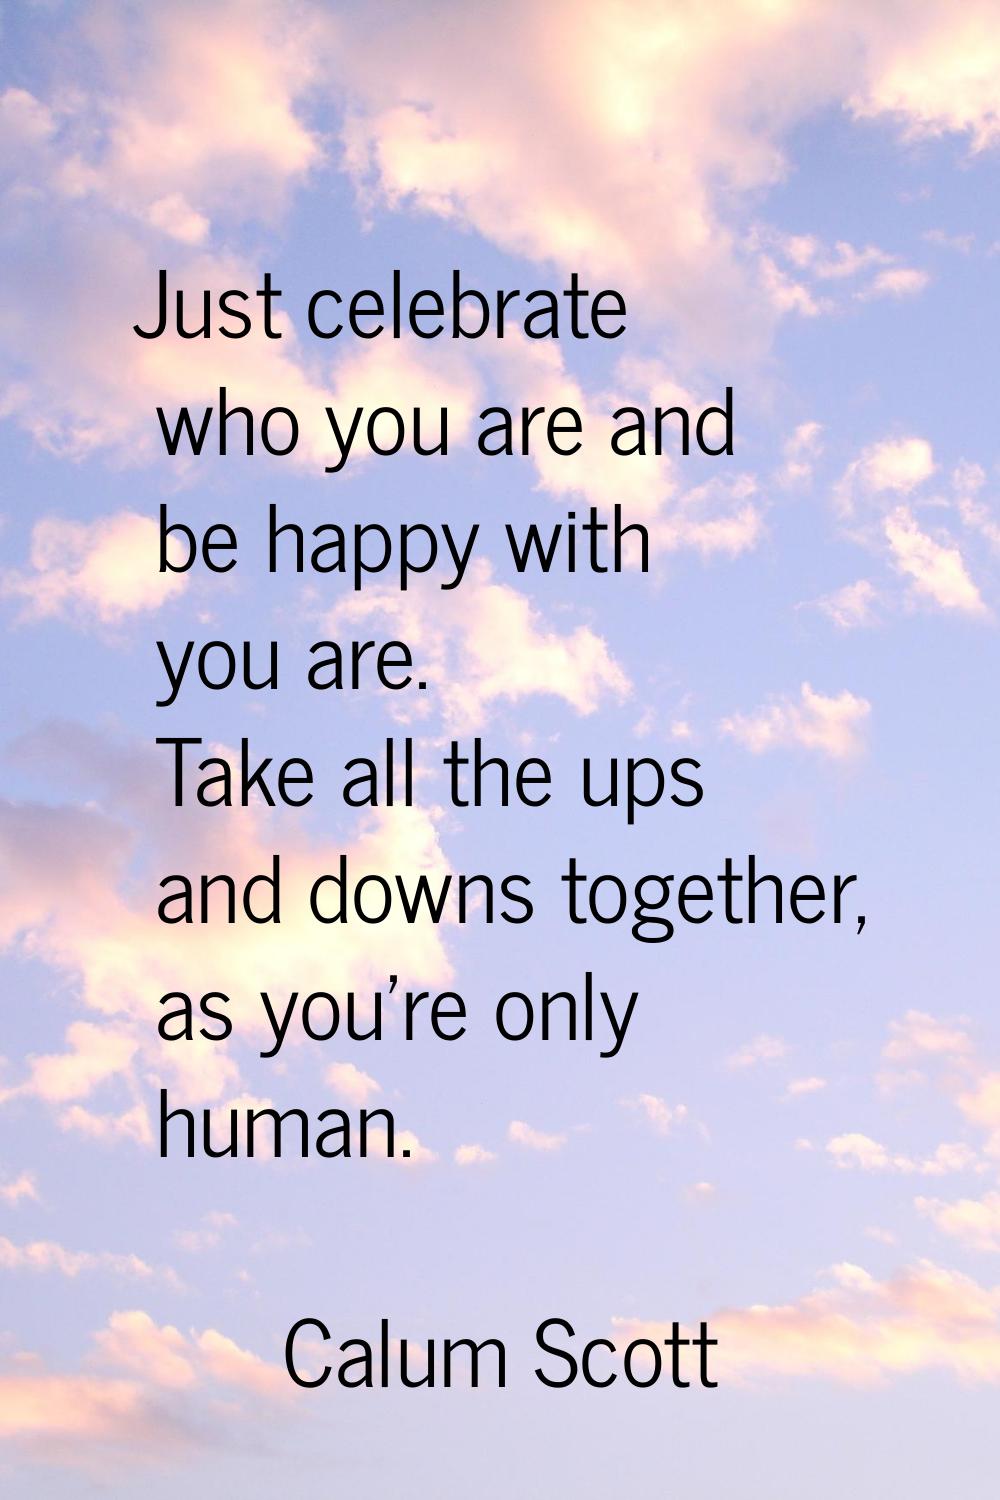 Just celebrate who you are and be happy with you are. Take all the ups and downs together, as you'r